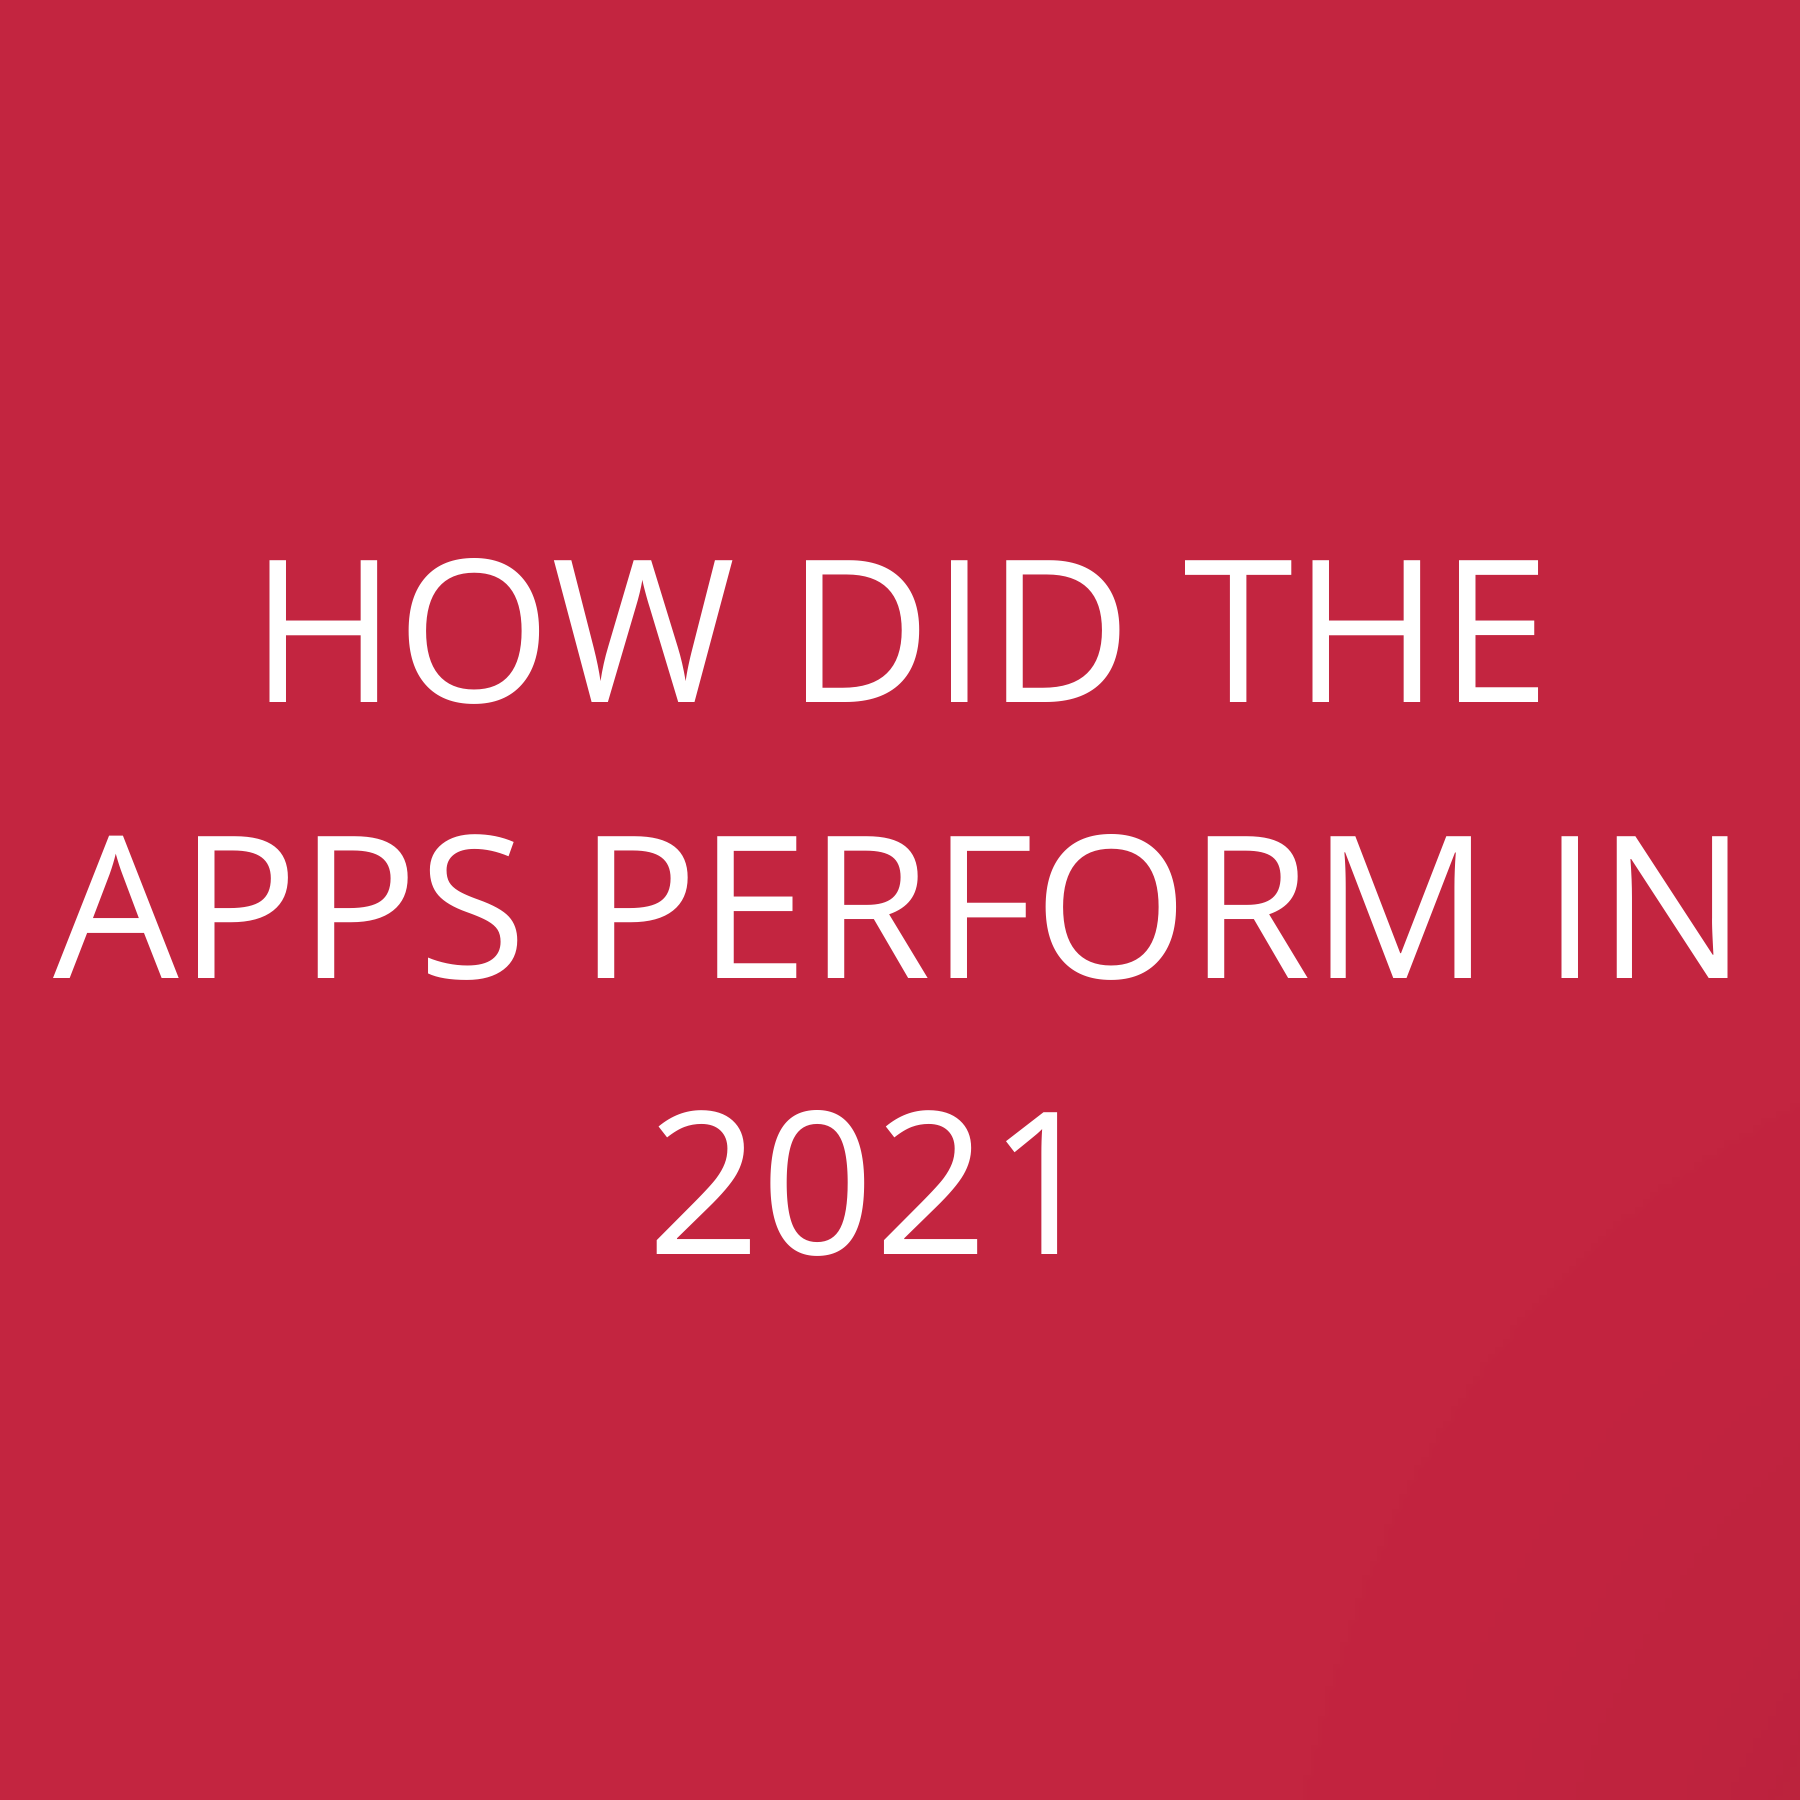 How did the apps perform in 2021